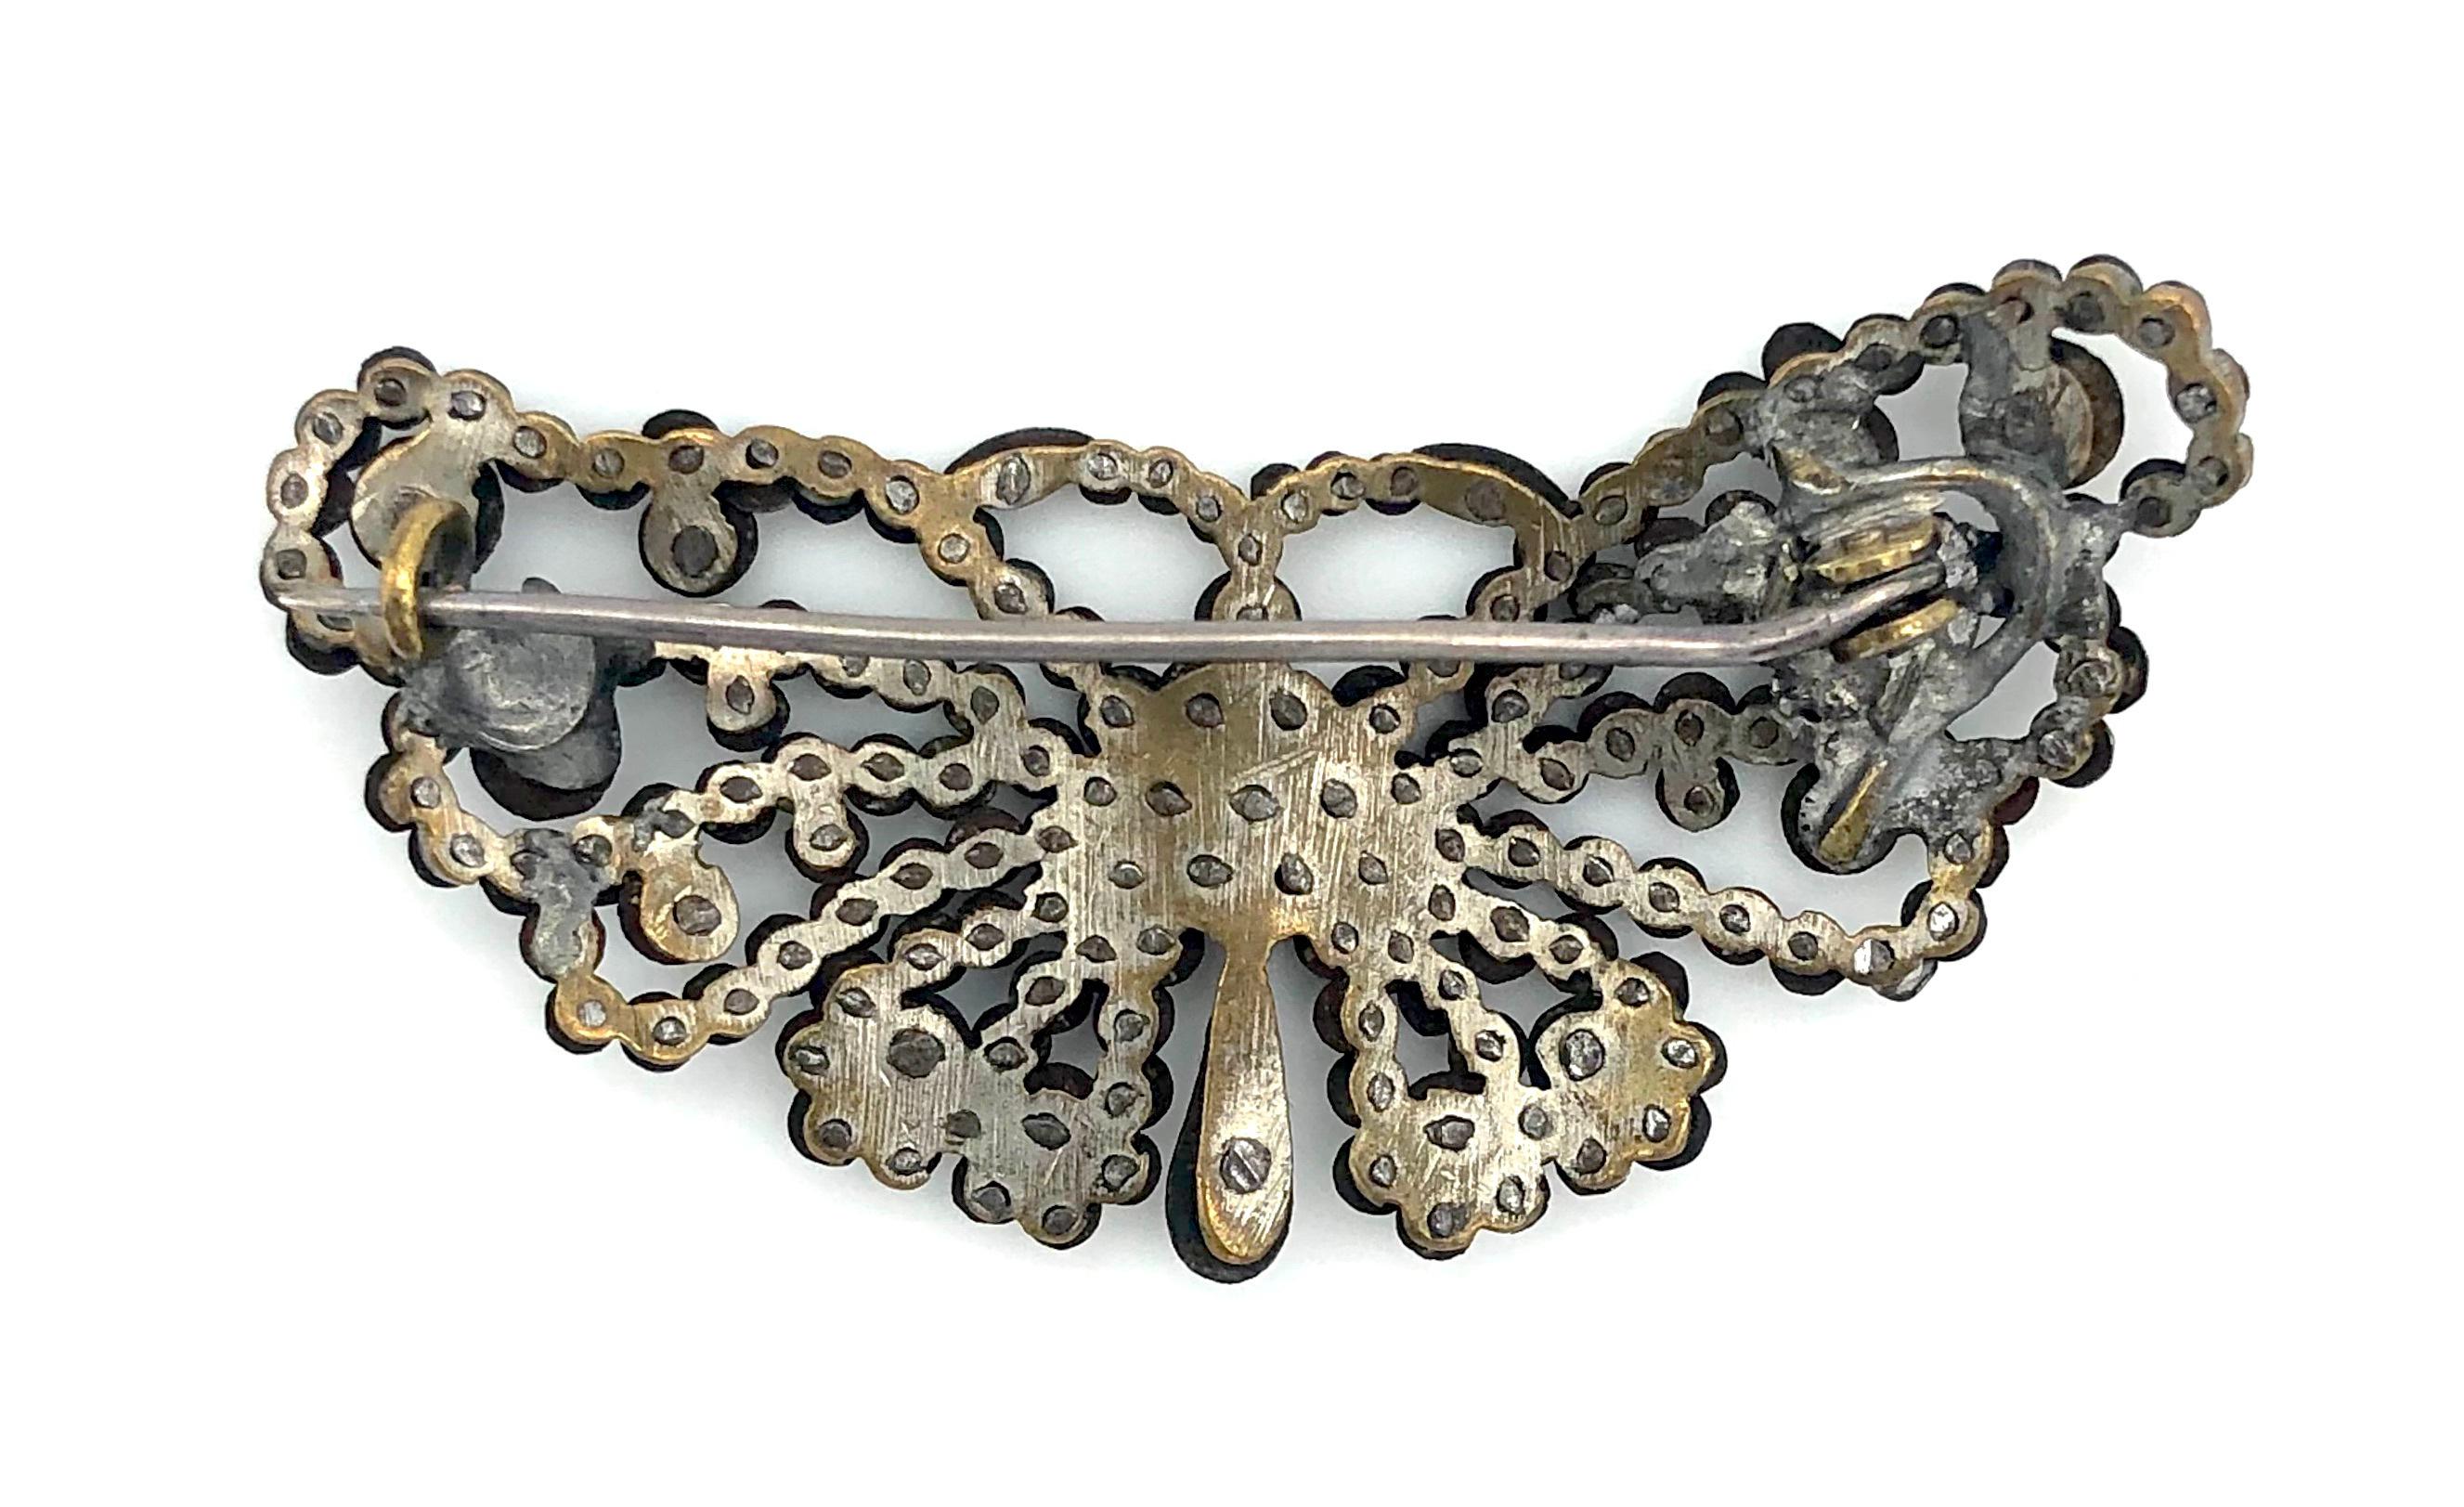 This charming little brooch in the shape of a butterfly has been made around 1830 out of polished steel nails rivetted onto a metal base.